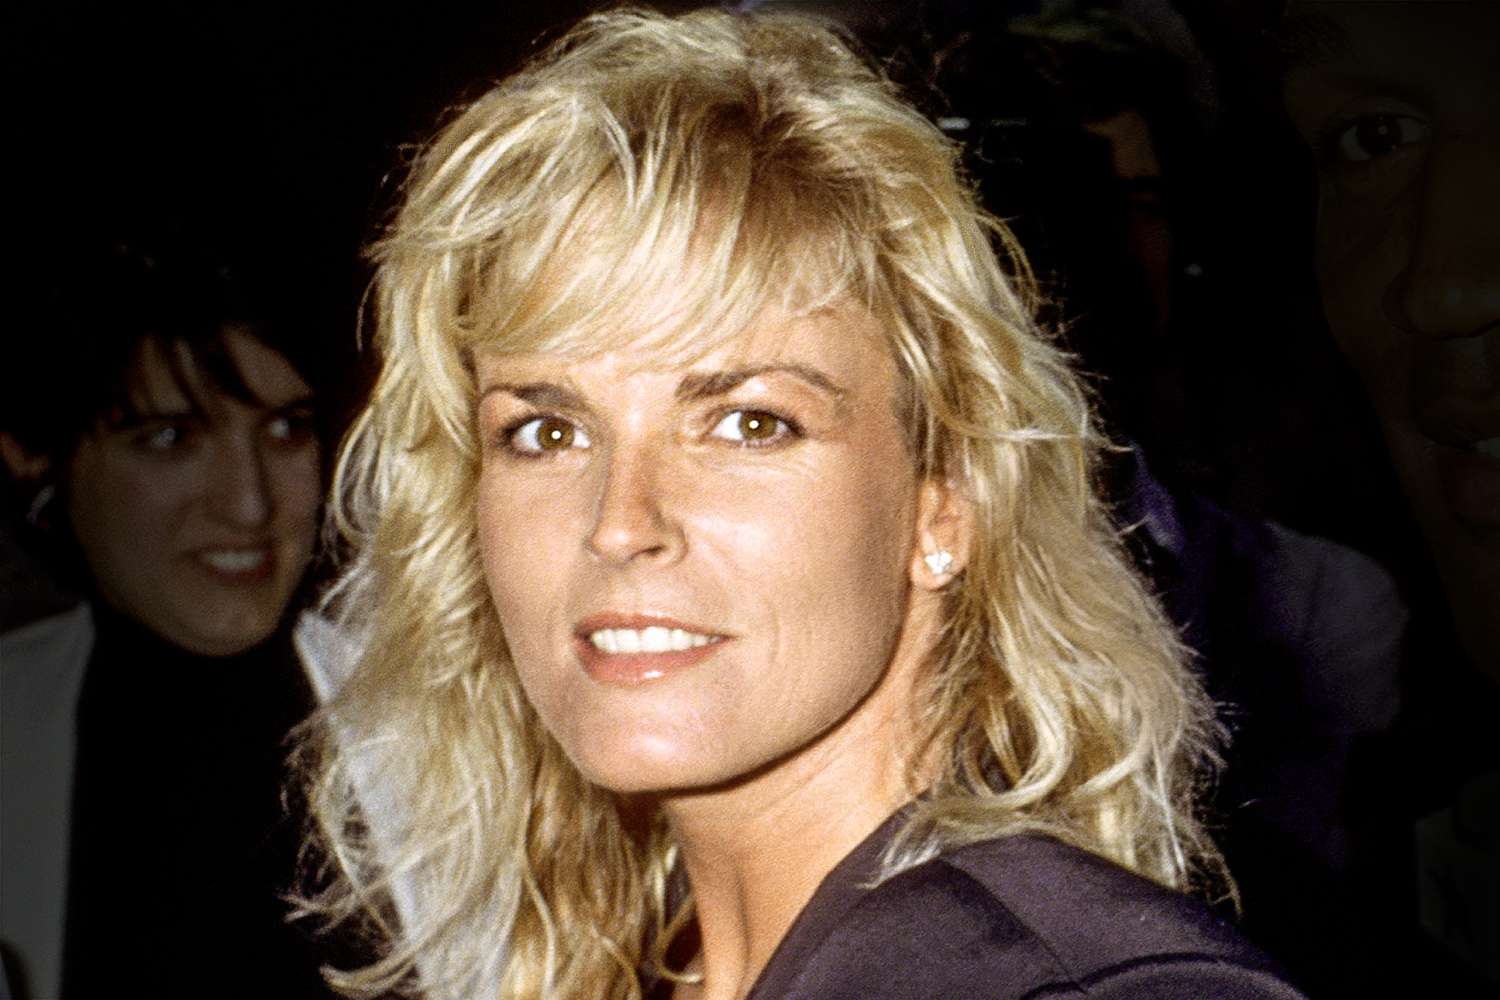 Nicole Brown Simpson Said O.J. Called Her a ‘Fat Pig’ When She Got Pregnant, Private Diary Reveals in New Doc